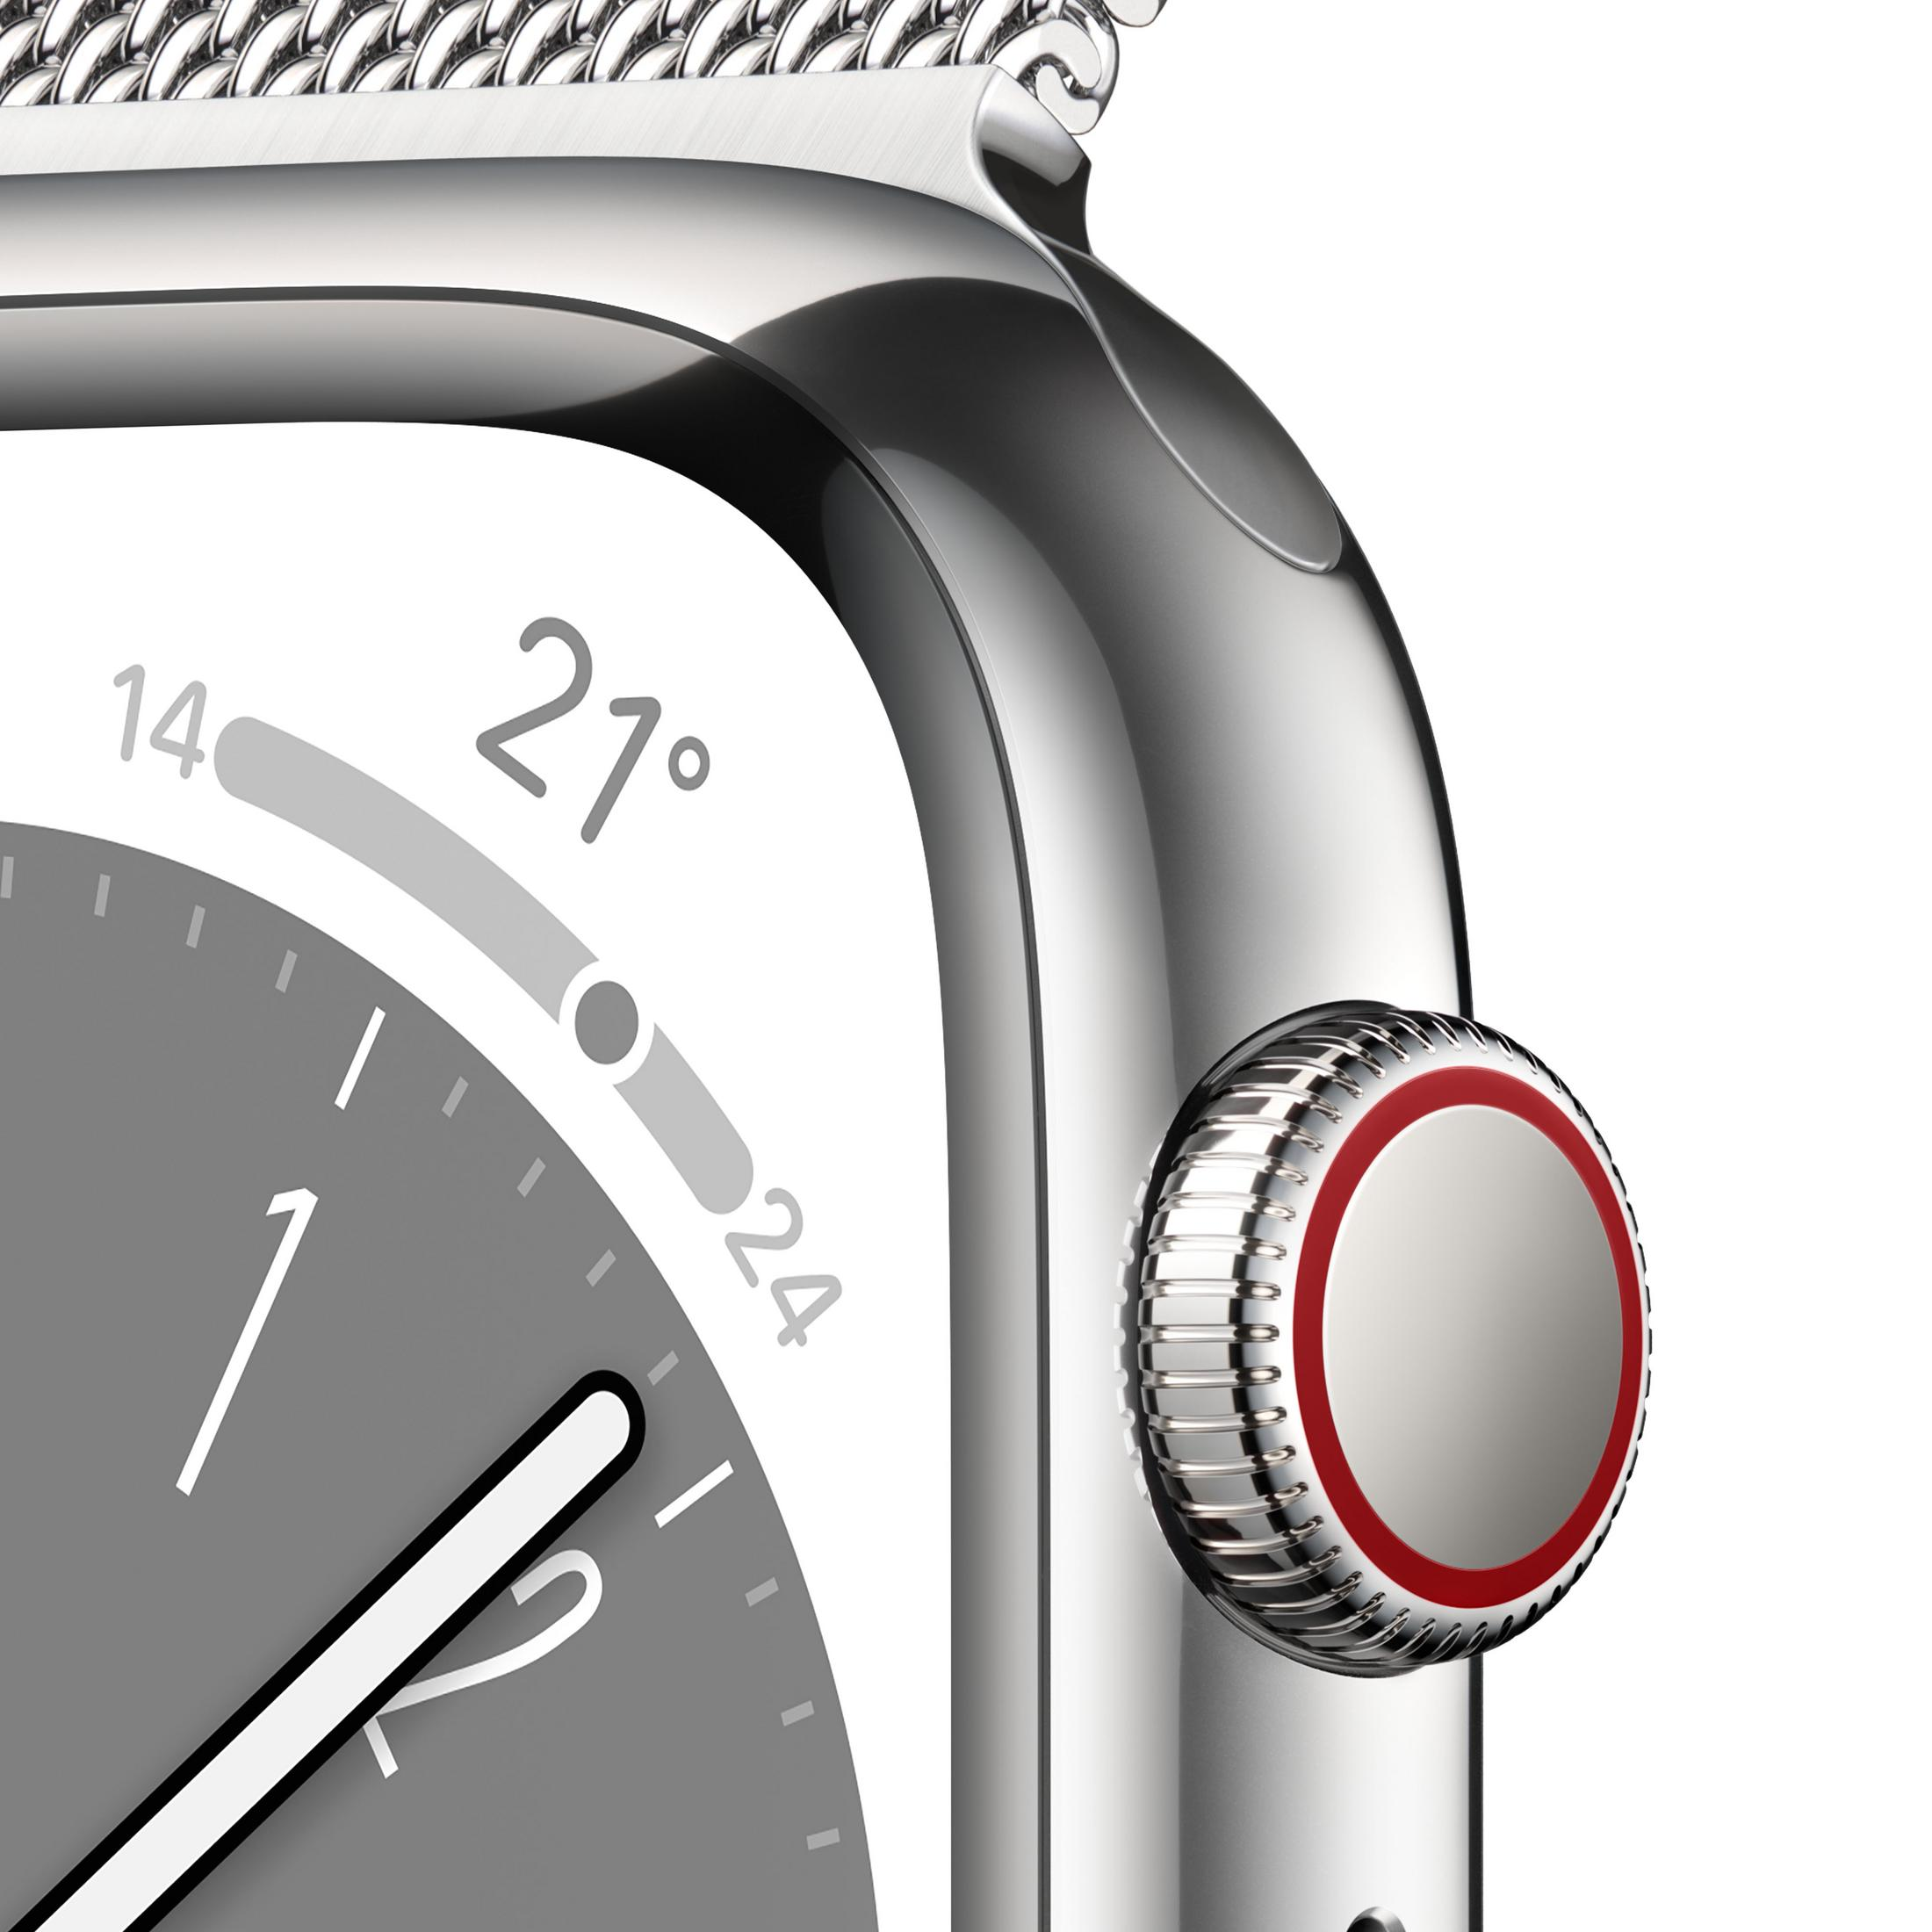 Silber, 130 41 Gehäuse: mm, Armband: SIL W ST MILANESE SIL APPLE Smartwatch STAINL WITH Edelstahl Milanaise, Silber GPS+CEL 200 - S8